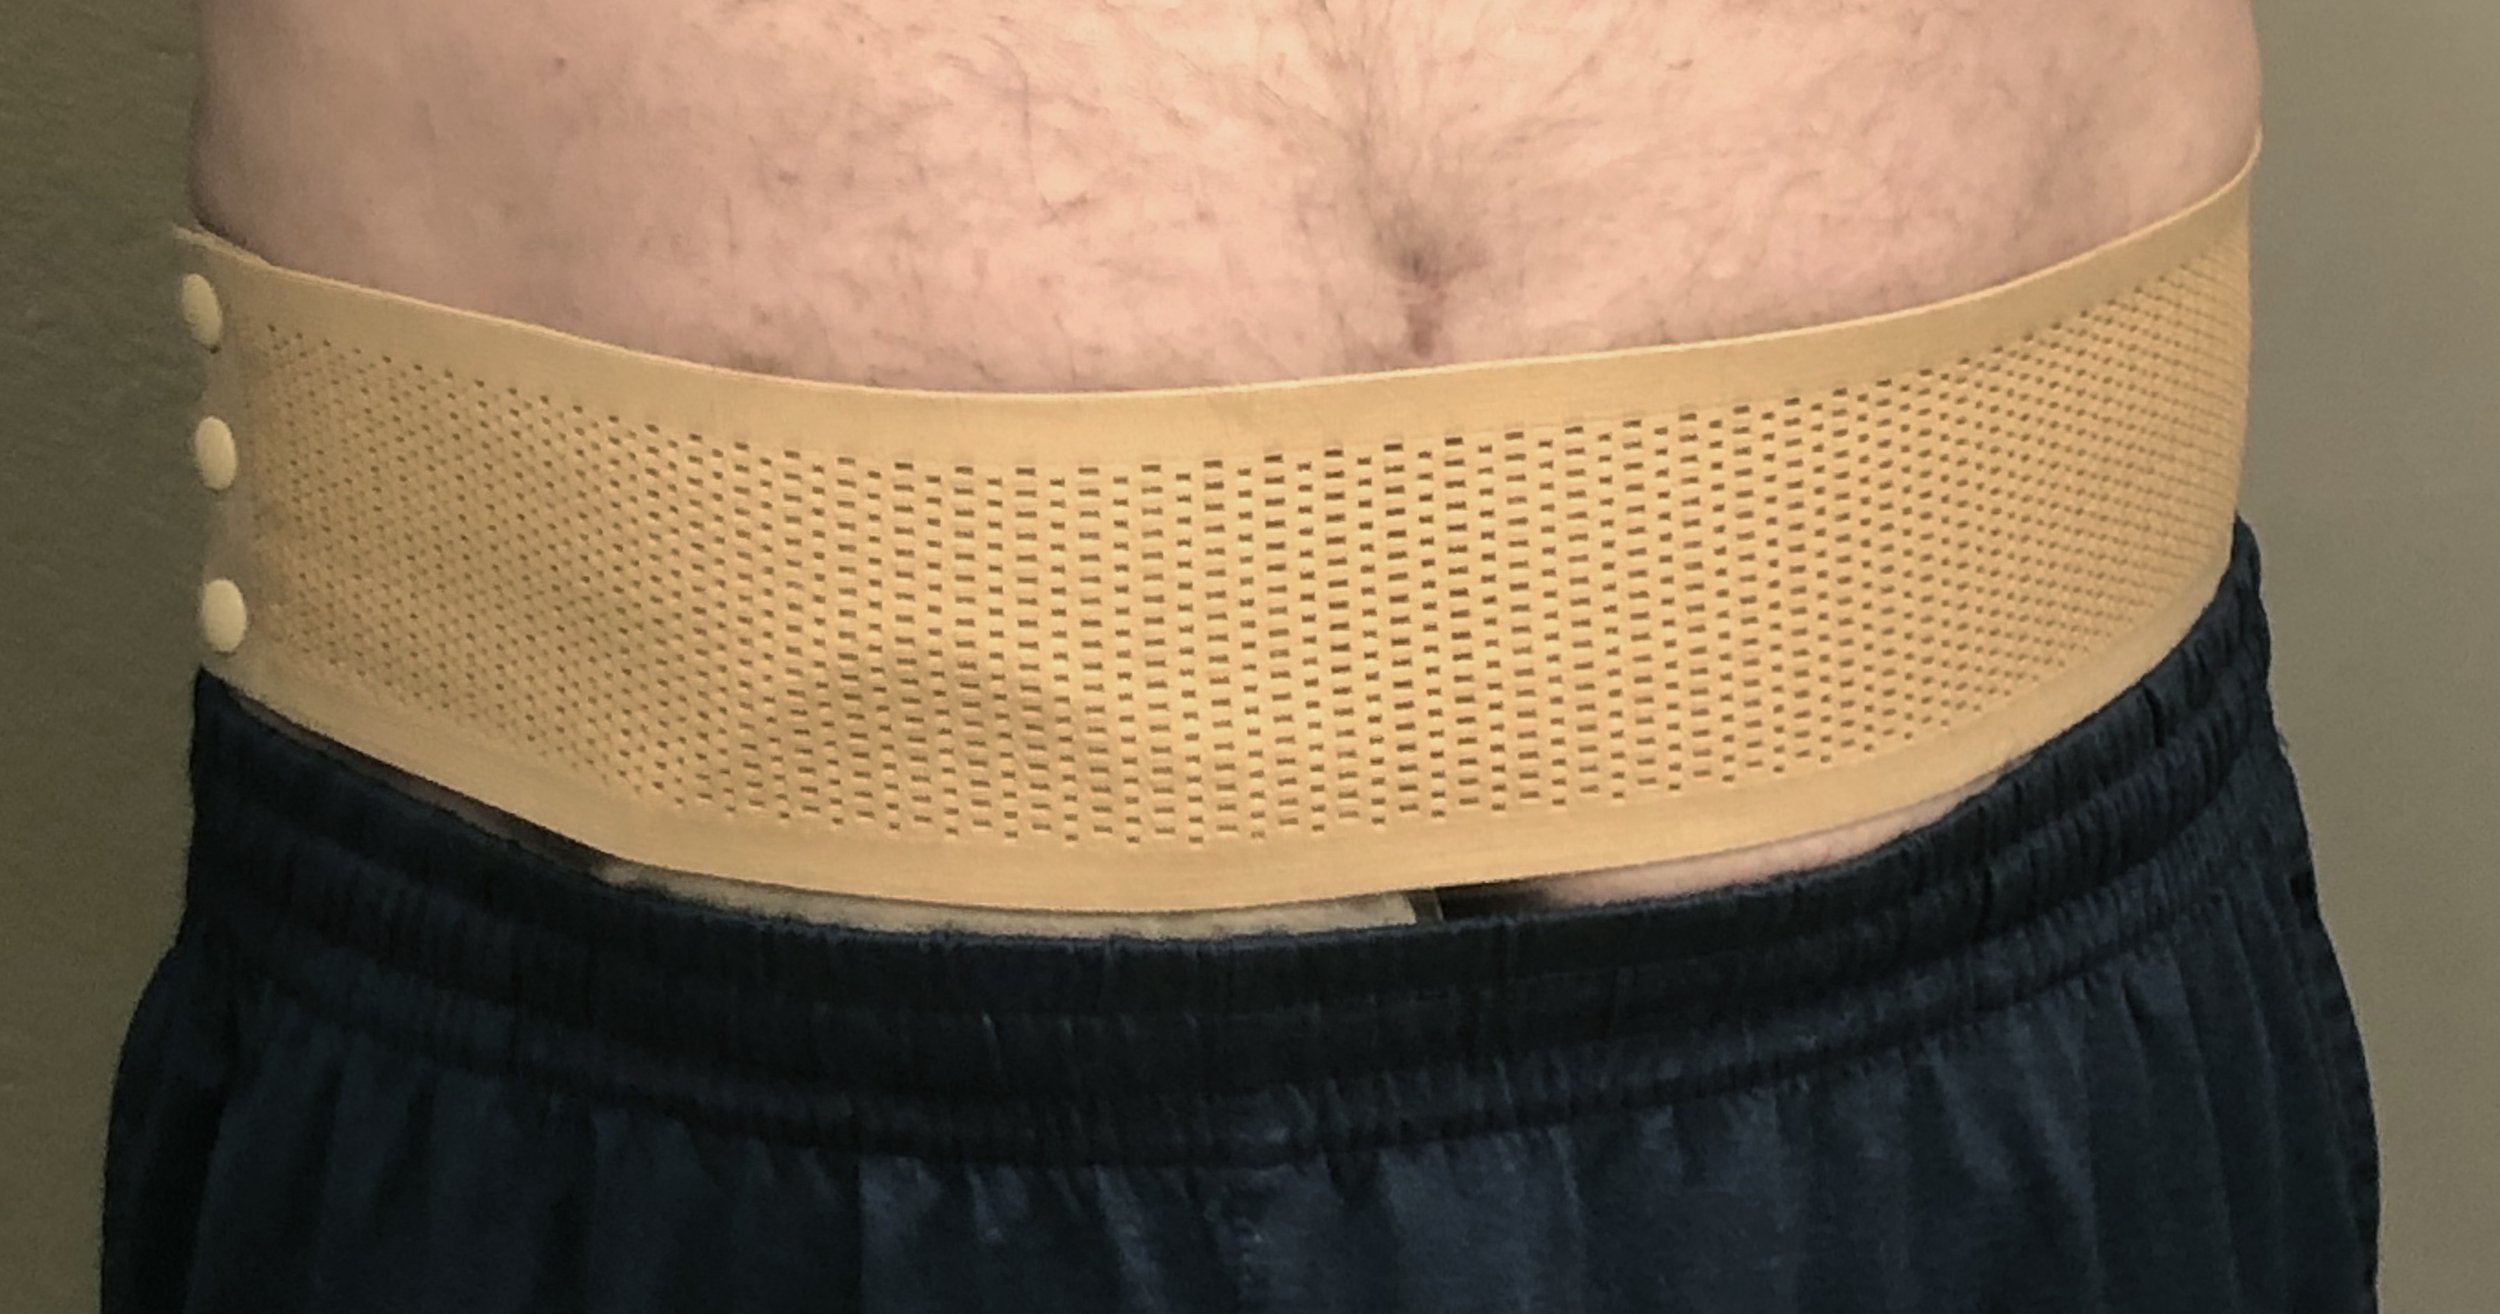 Our ostomy waistband conceals your ostomy pouch under clothing